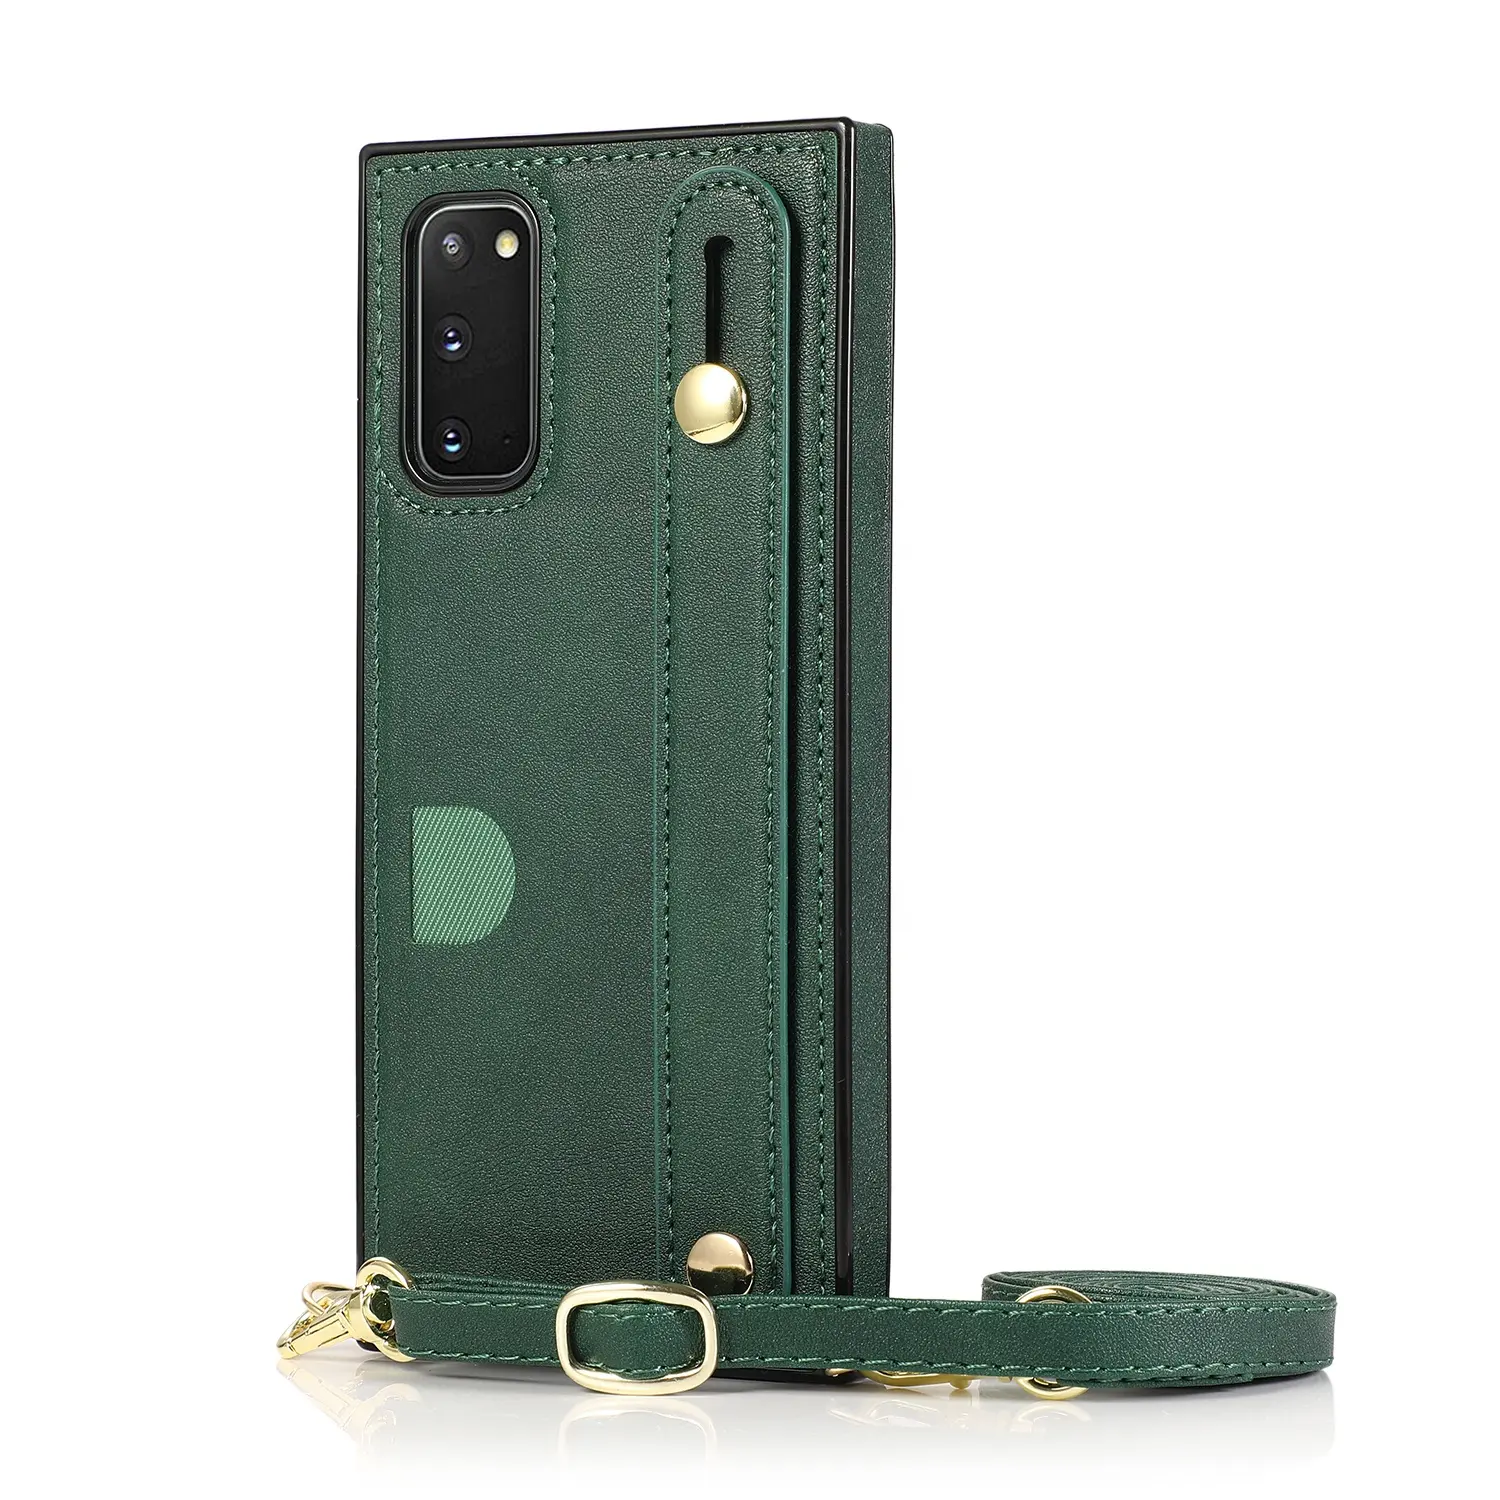 New stylish luxury Samsung phone case hone Stand Wrist Strap Hand Band For Samsung S10 S10E case S23 S20 ultra cover